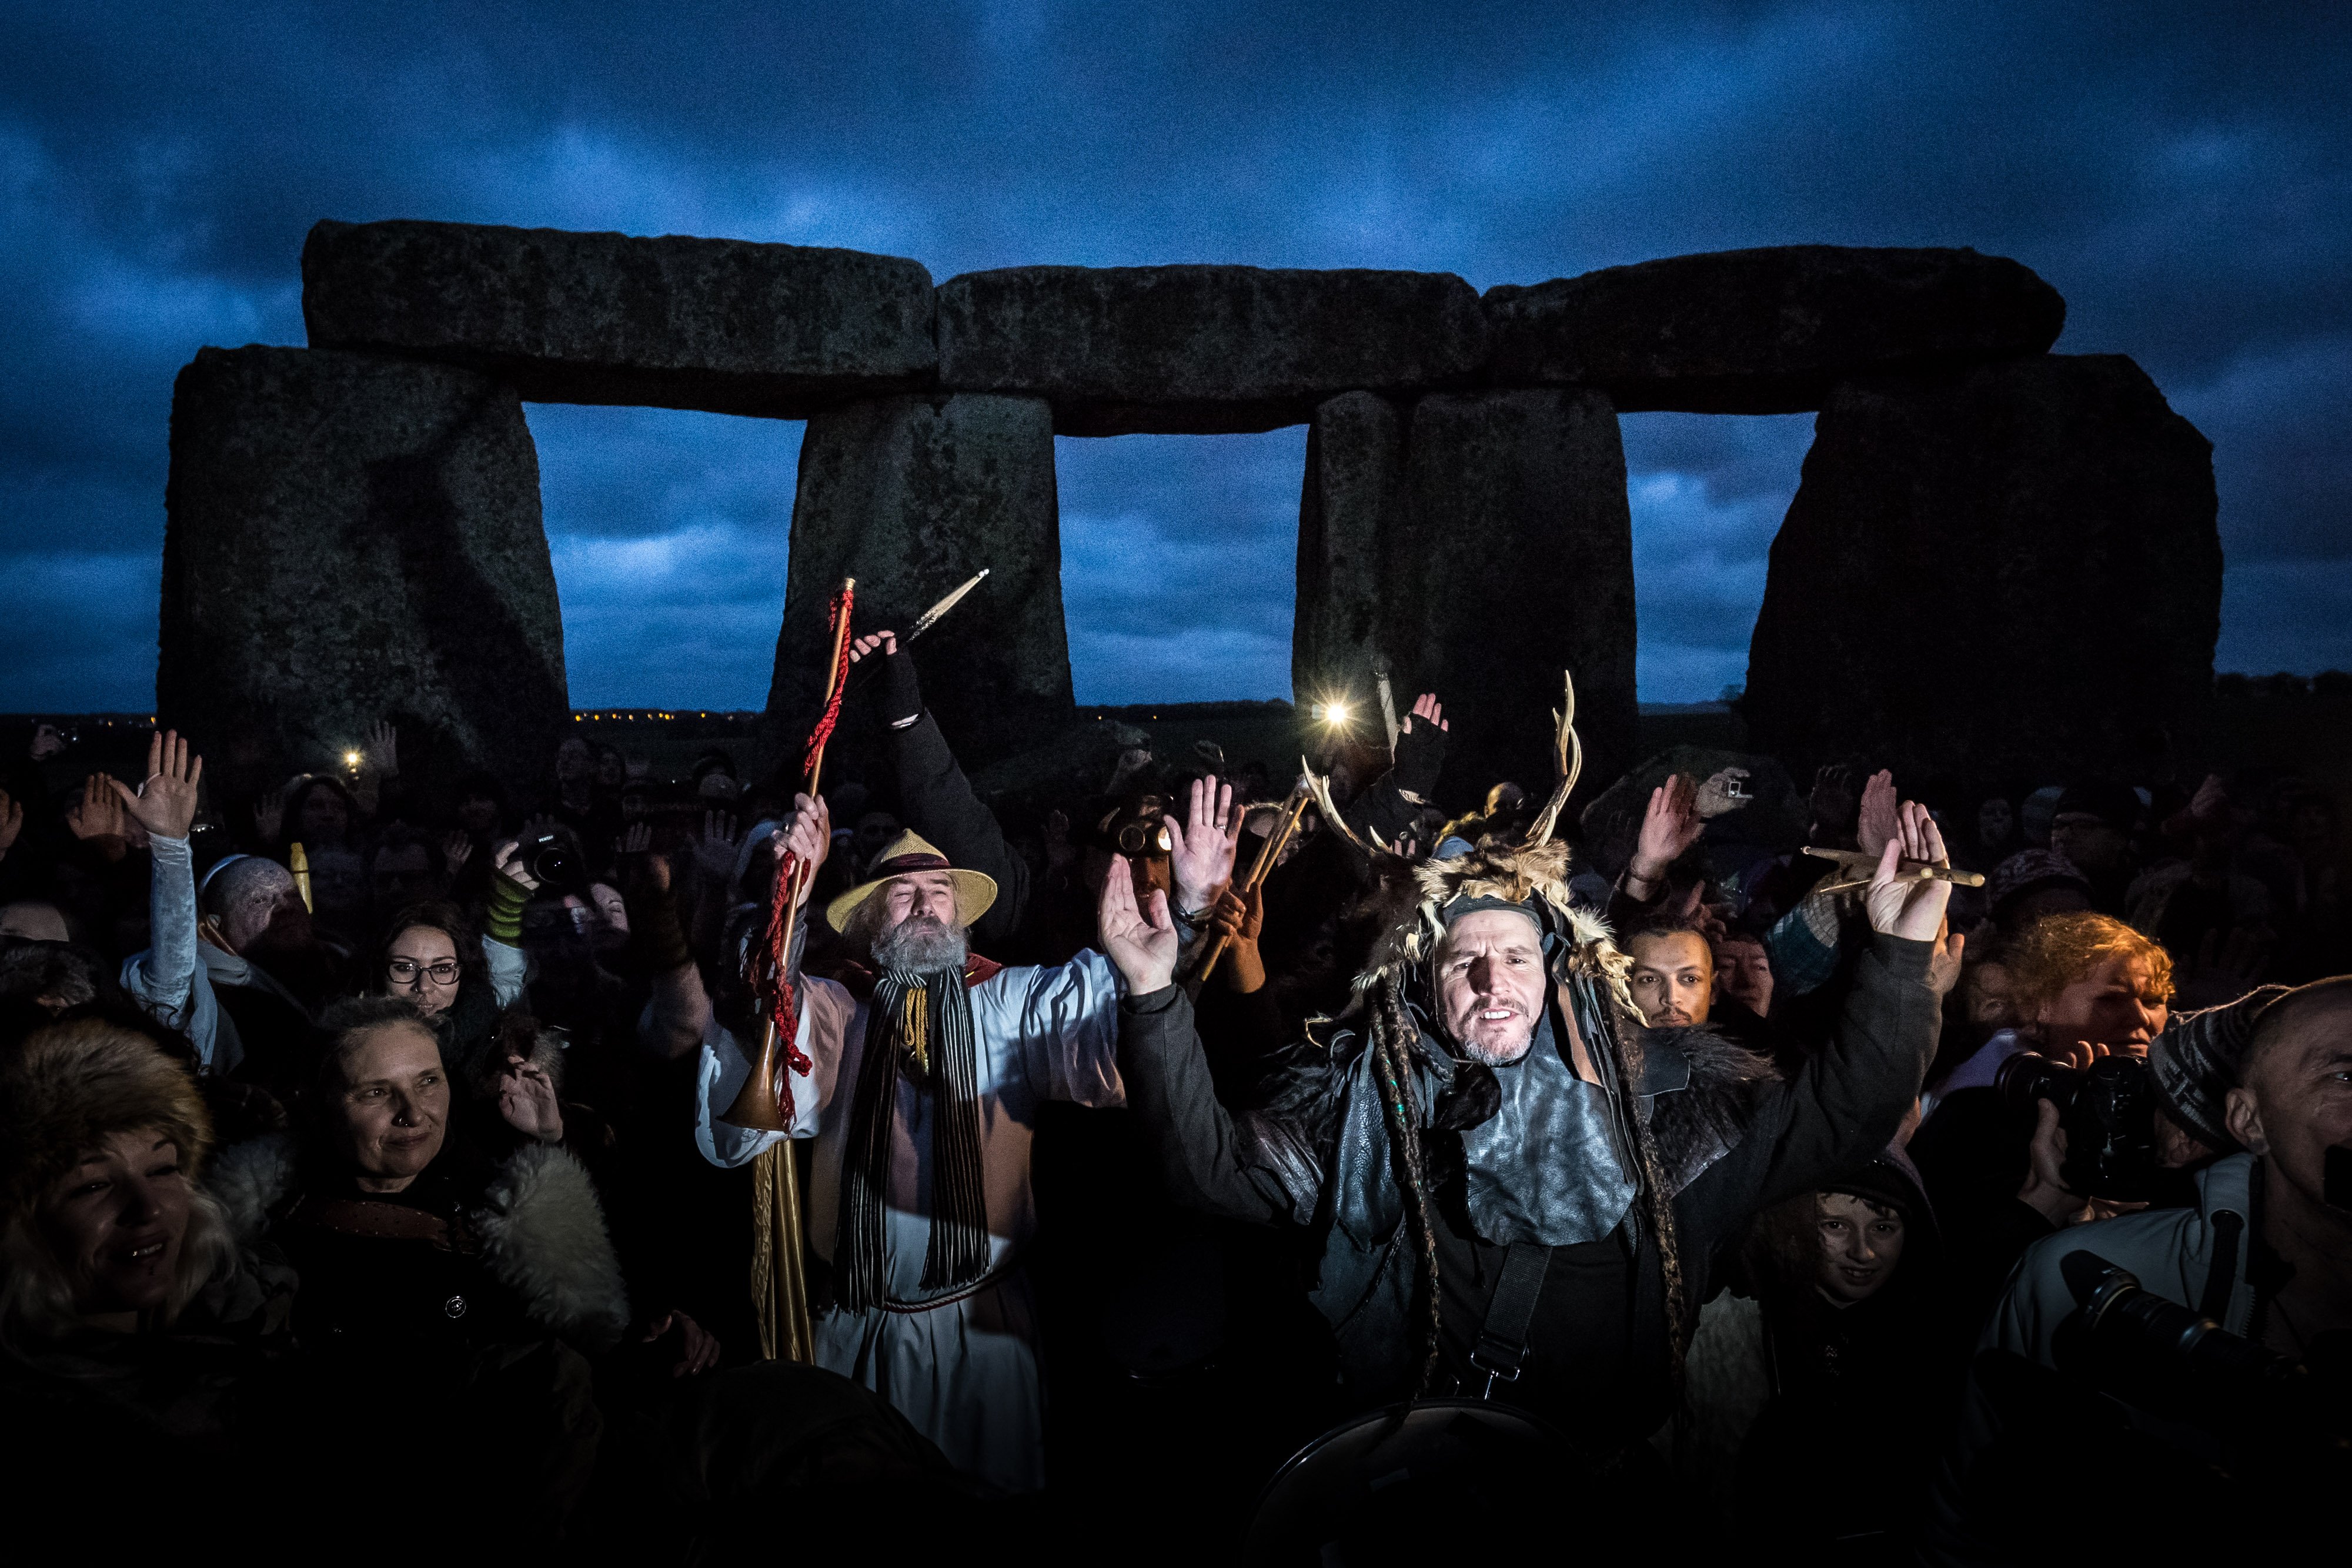 Revelers gather near the ancient stones at Stonehenge on Salisbury Plain, UK to celebrate the first day of winter, on Dec. 22, 2015.